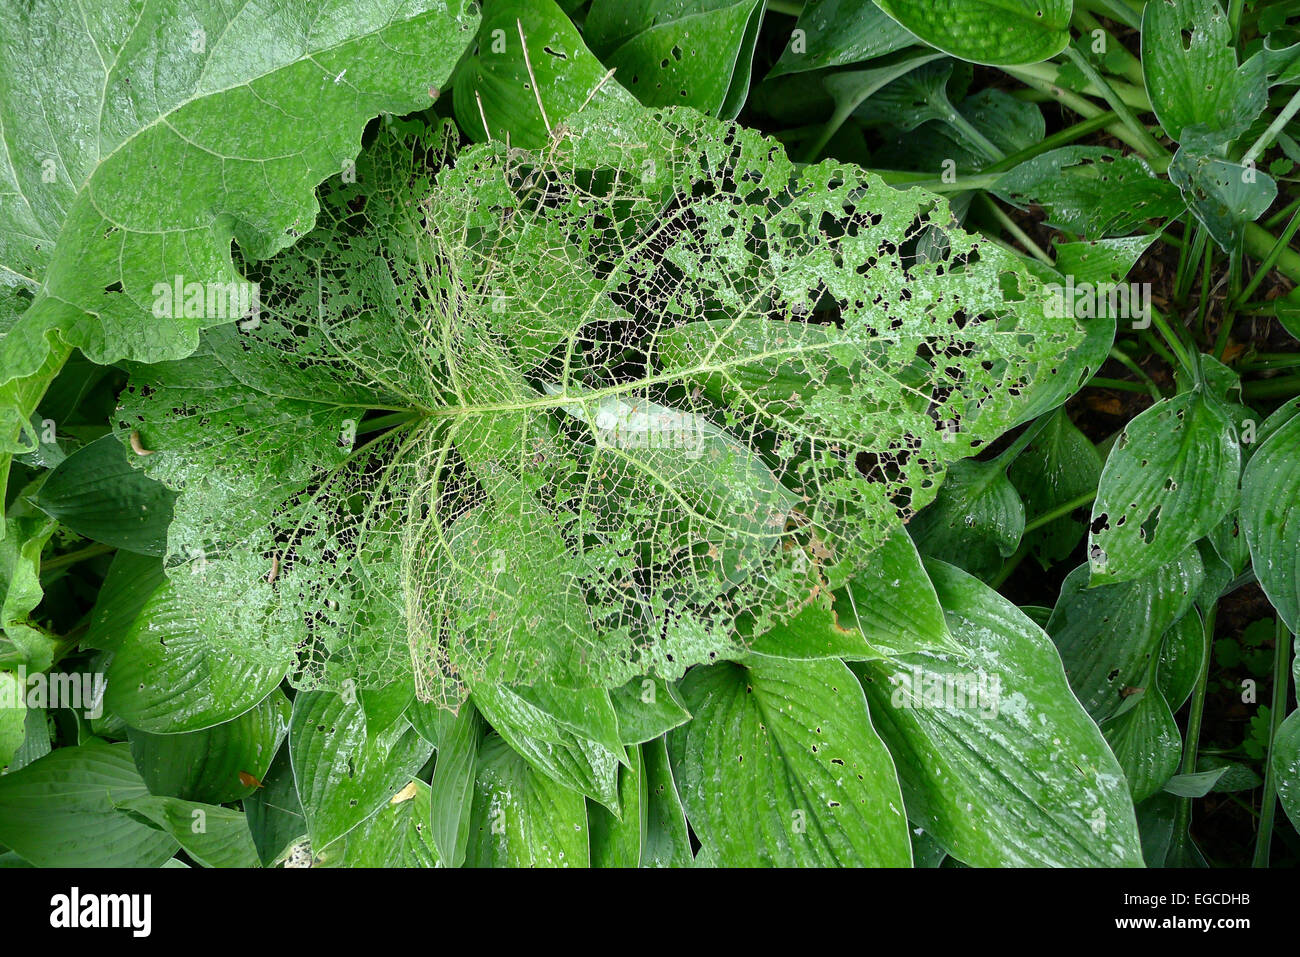 The characteristic tattered and finely skeletonized remains of a leaf that has been damaged Japanese beetles. Stock Photo